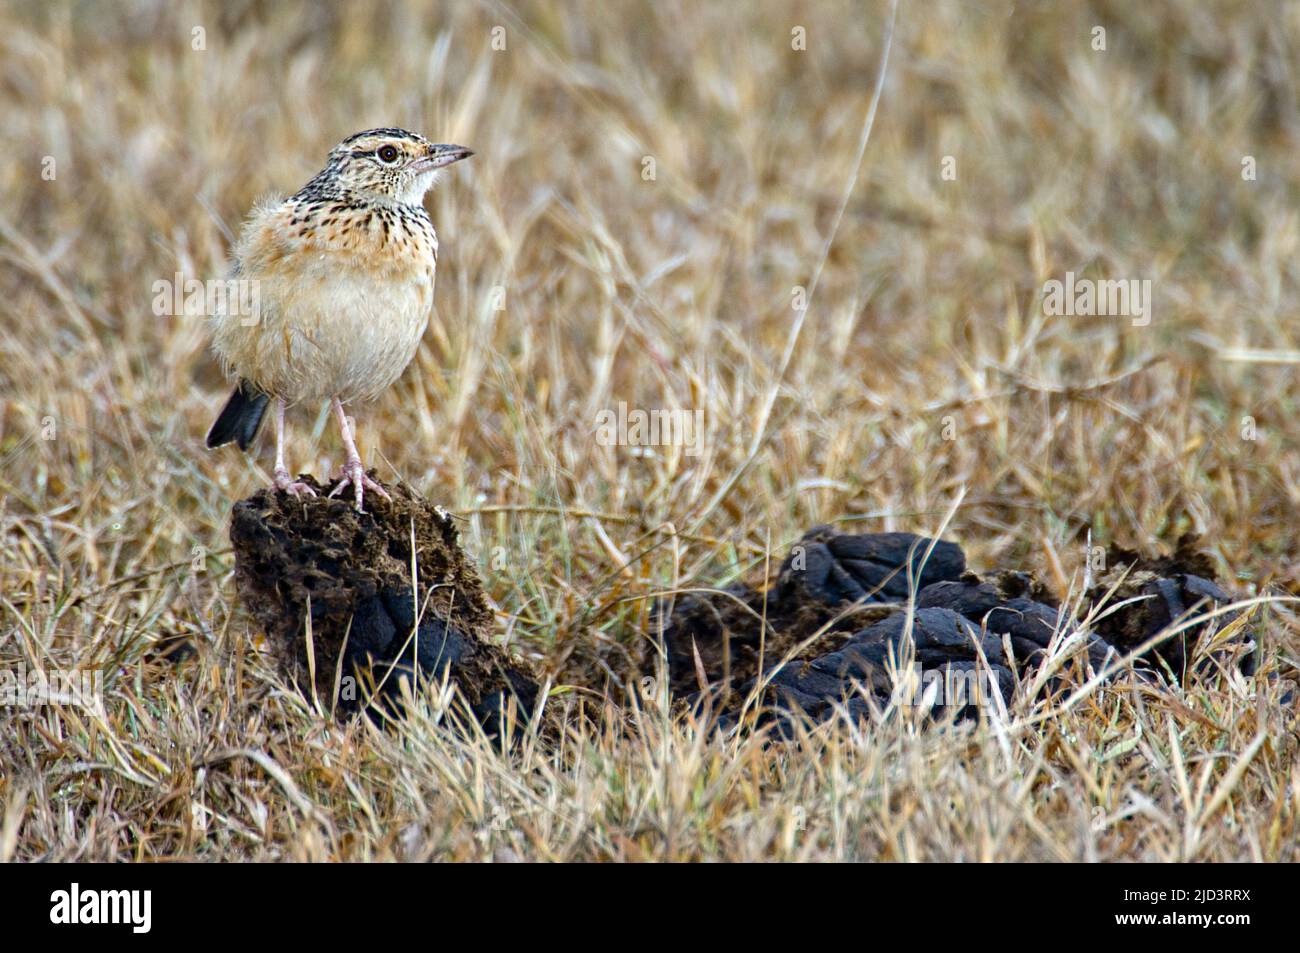 Pipit (Anthus sp.) from Sweetwater, Kenya. Stock Photo